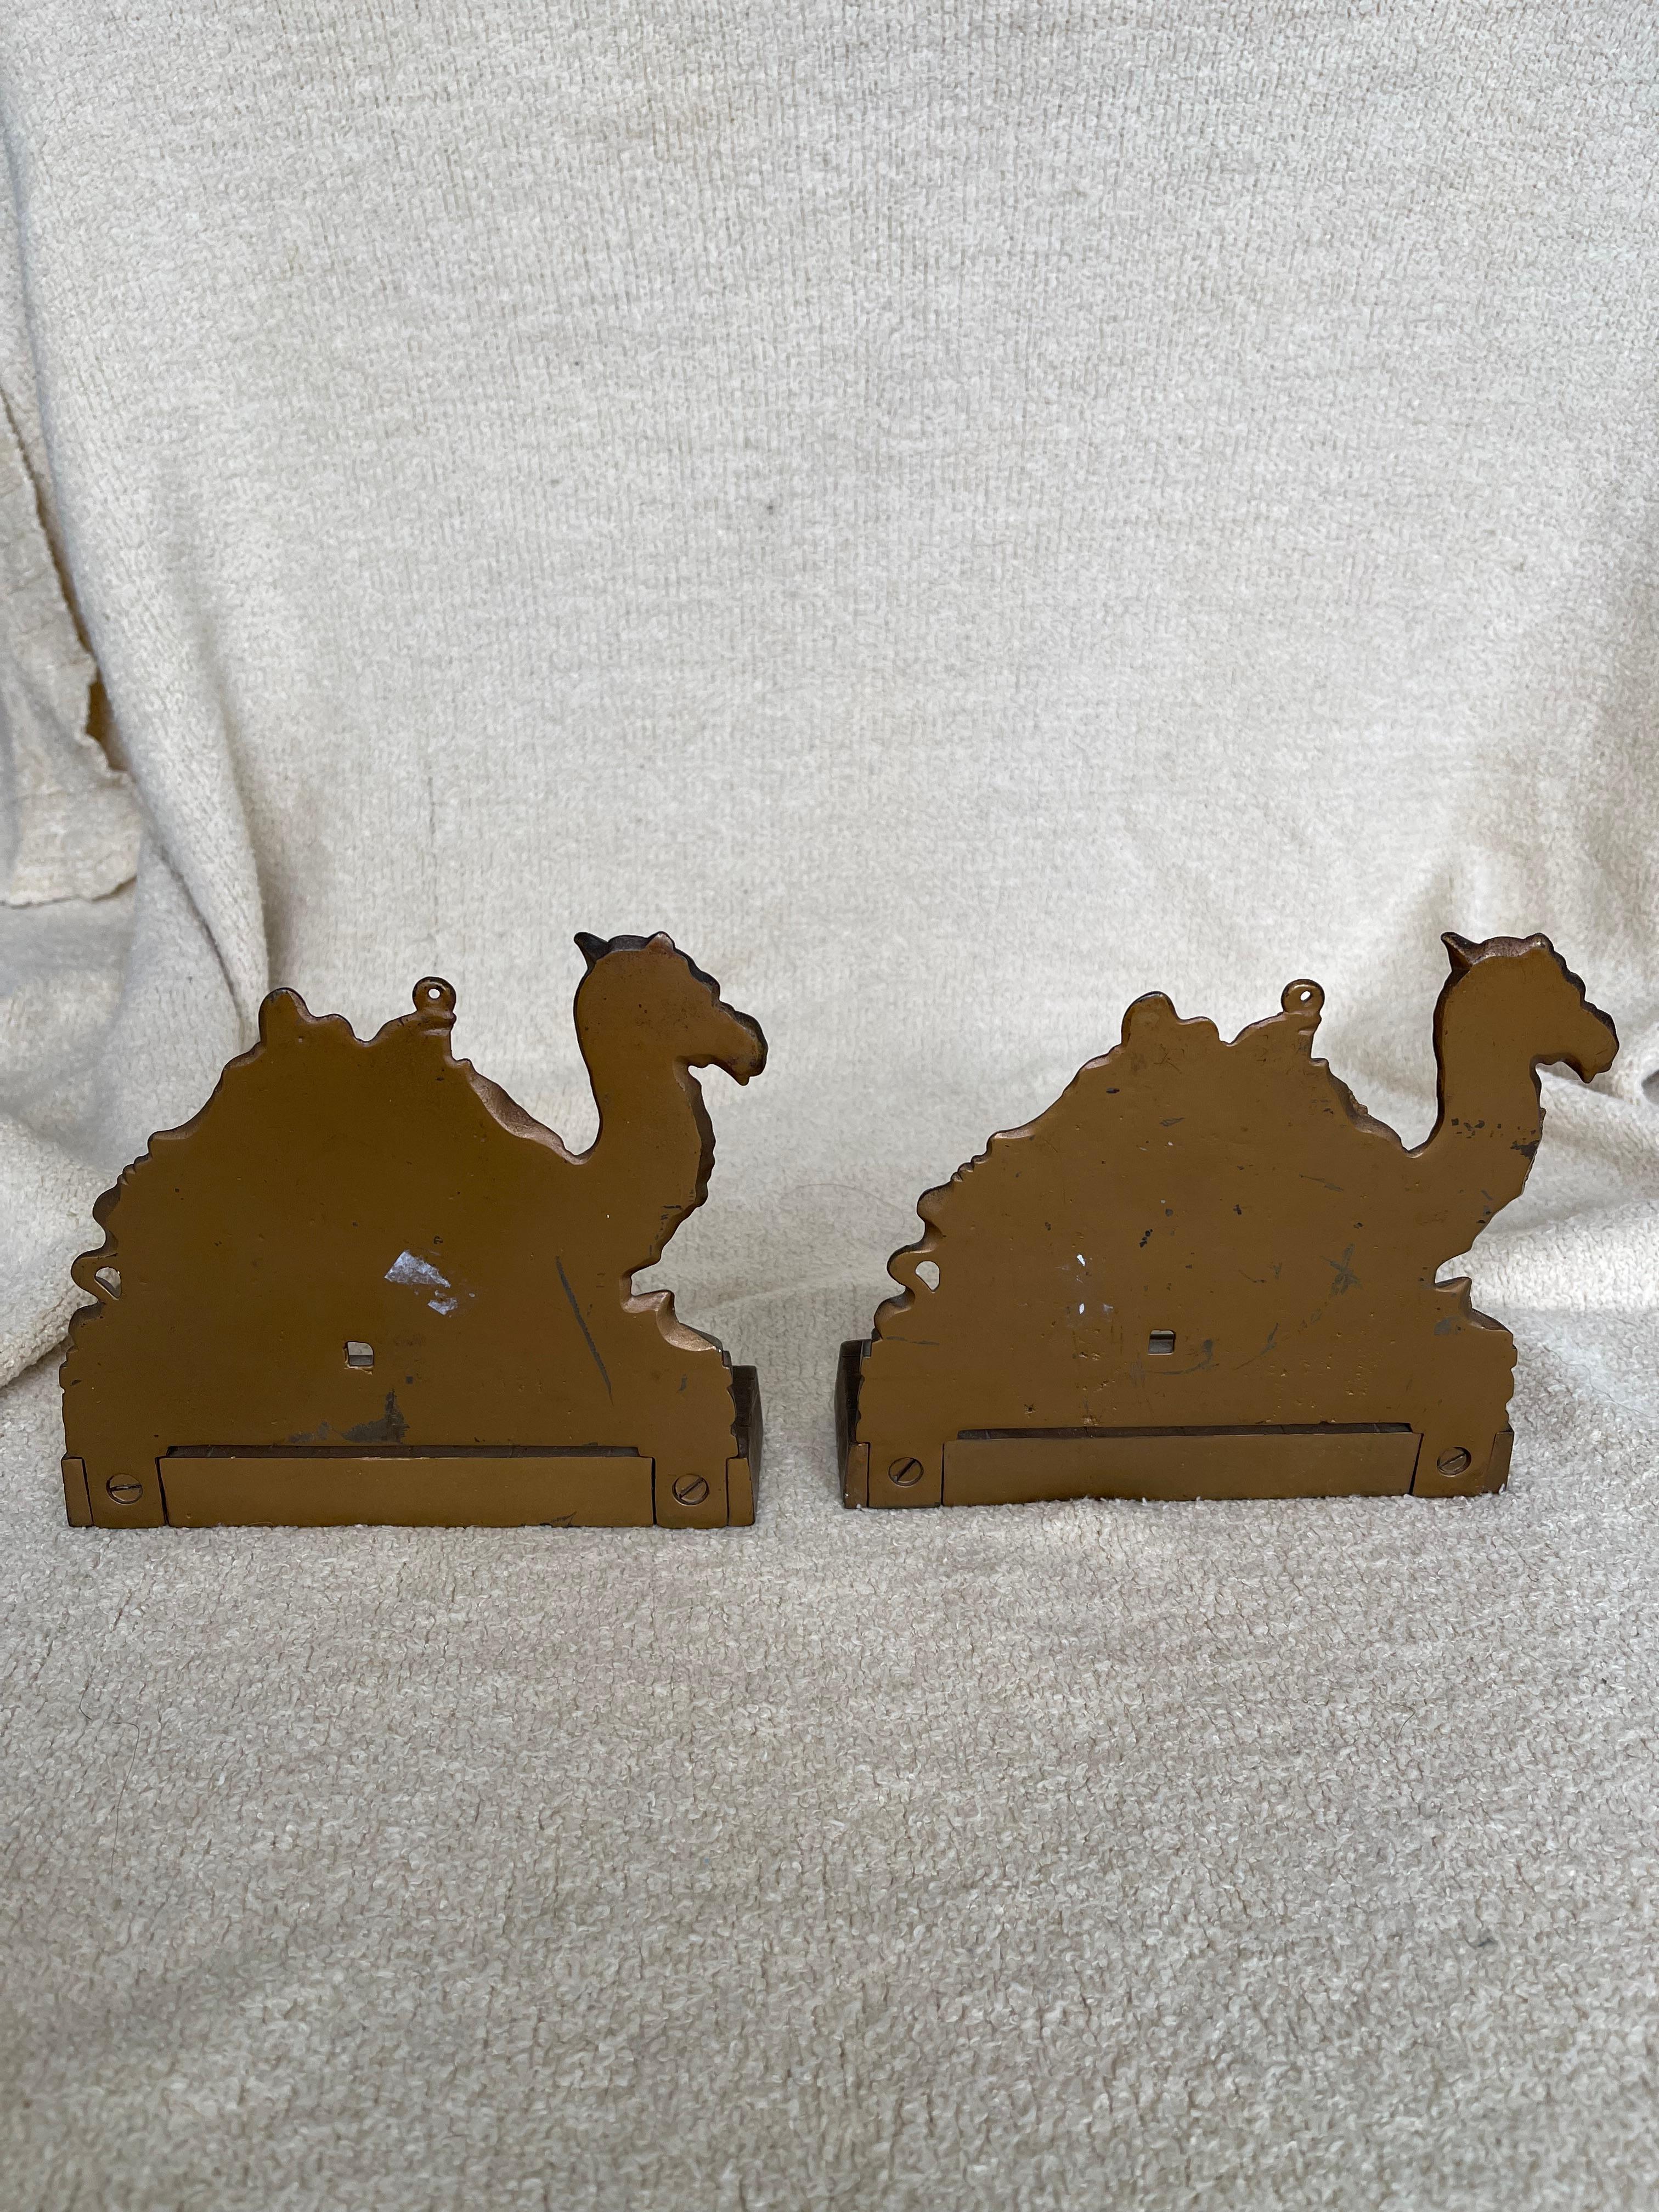 Art Deco Pair of Cast Iron Bookends w/Camels, by Judd Co. ca. 1920 For Sale